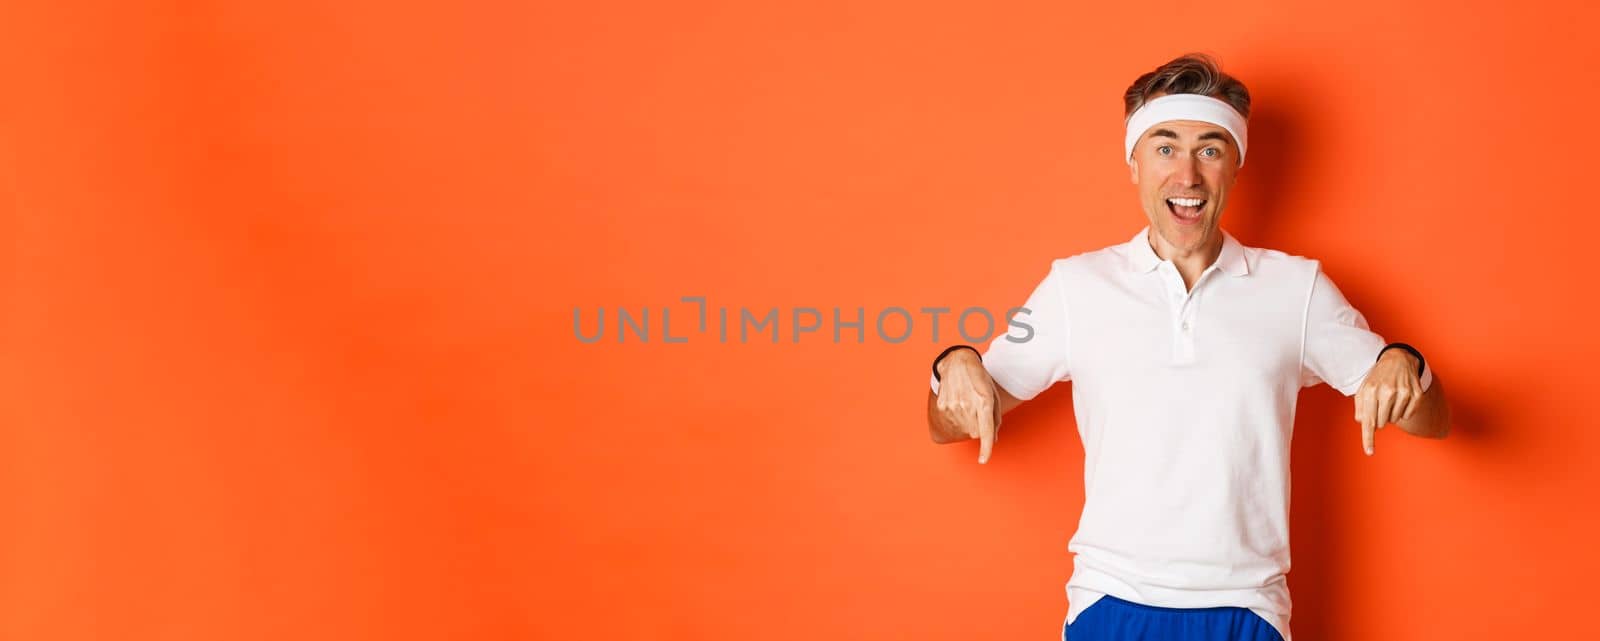 Concept of workout, sports and lifestyle. Portrait of happy middle-aged man in gym uniform, pointing fingers down and smiling amazed, showing promo offer, standing over orange background.